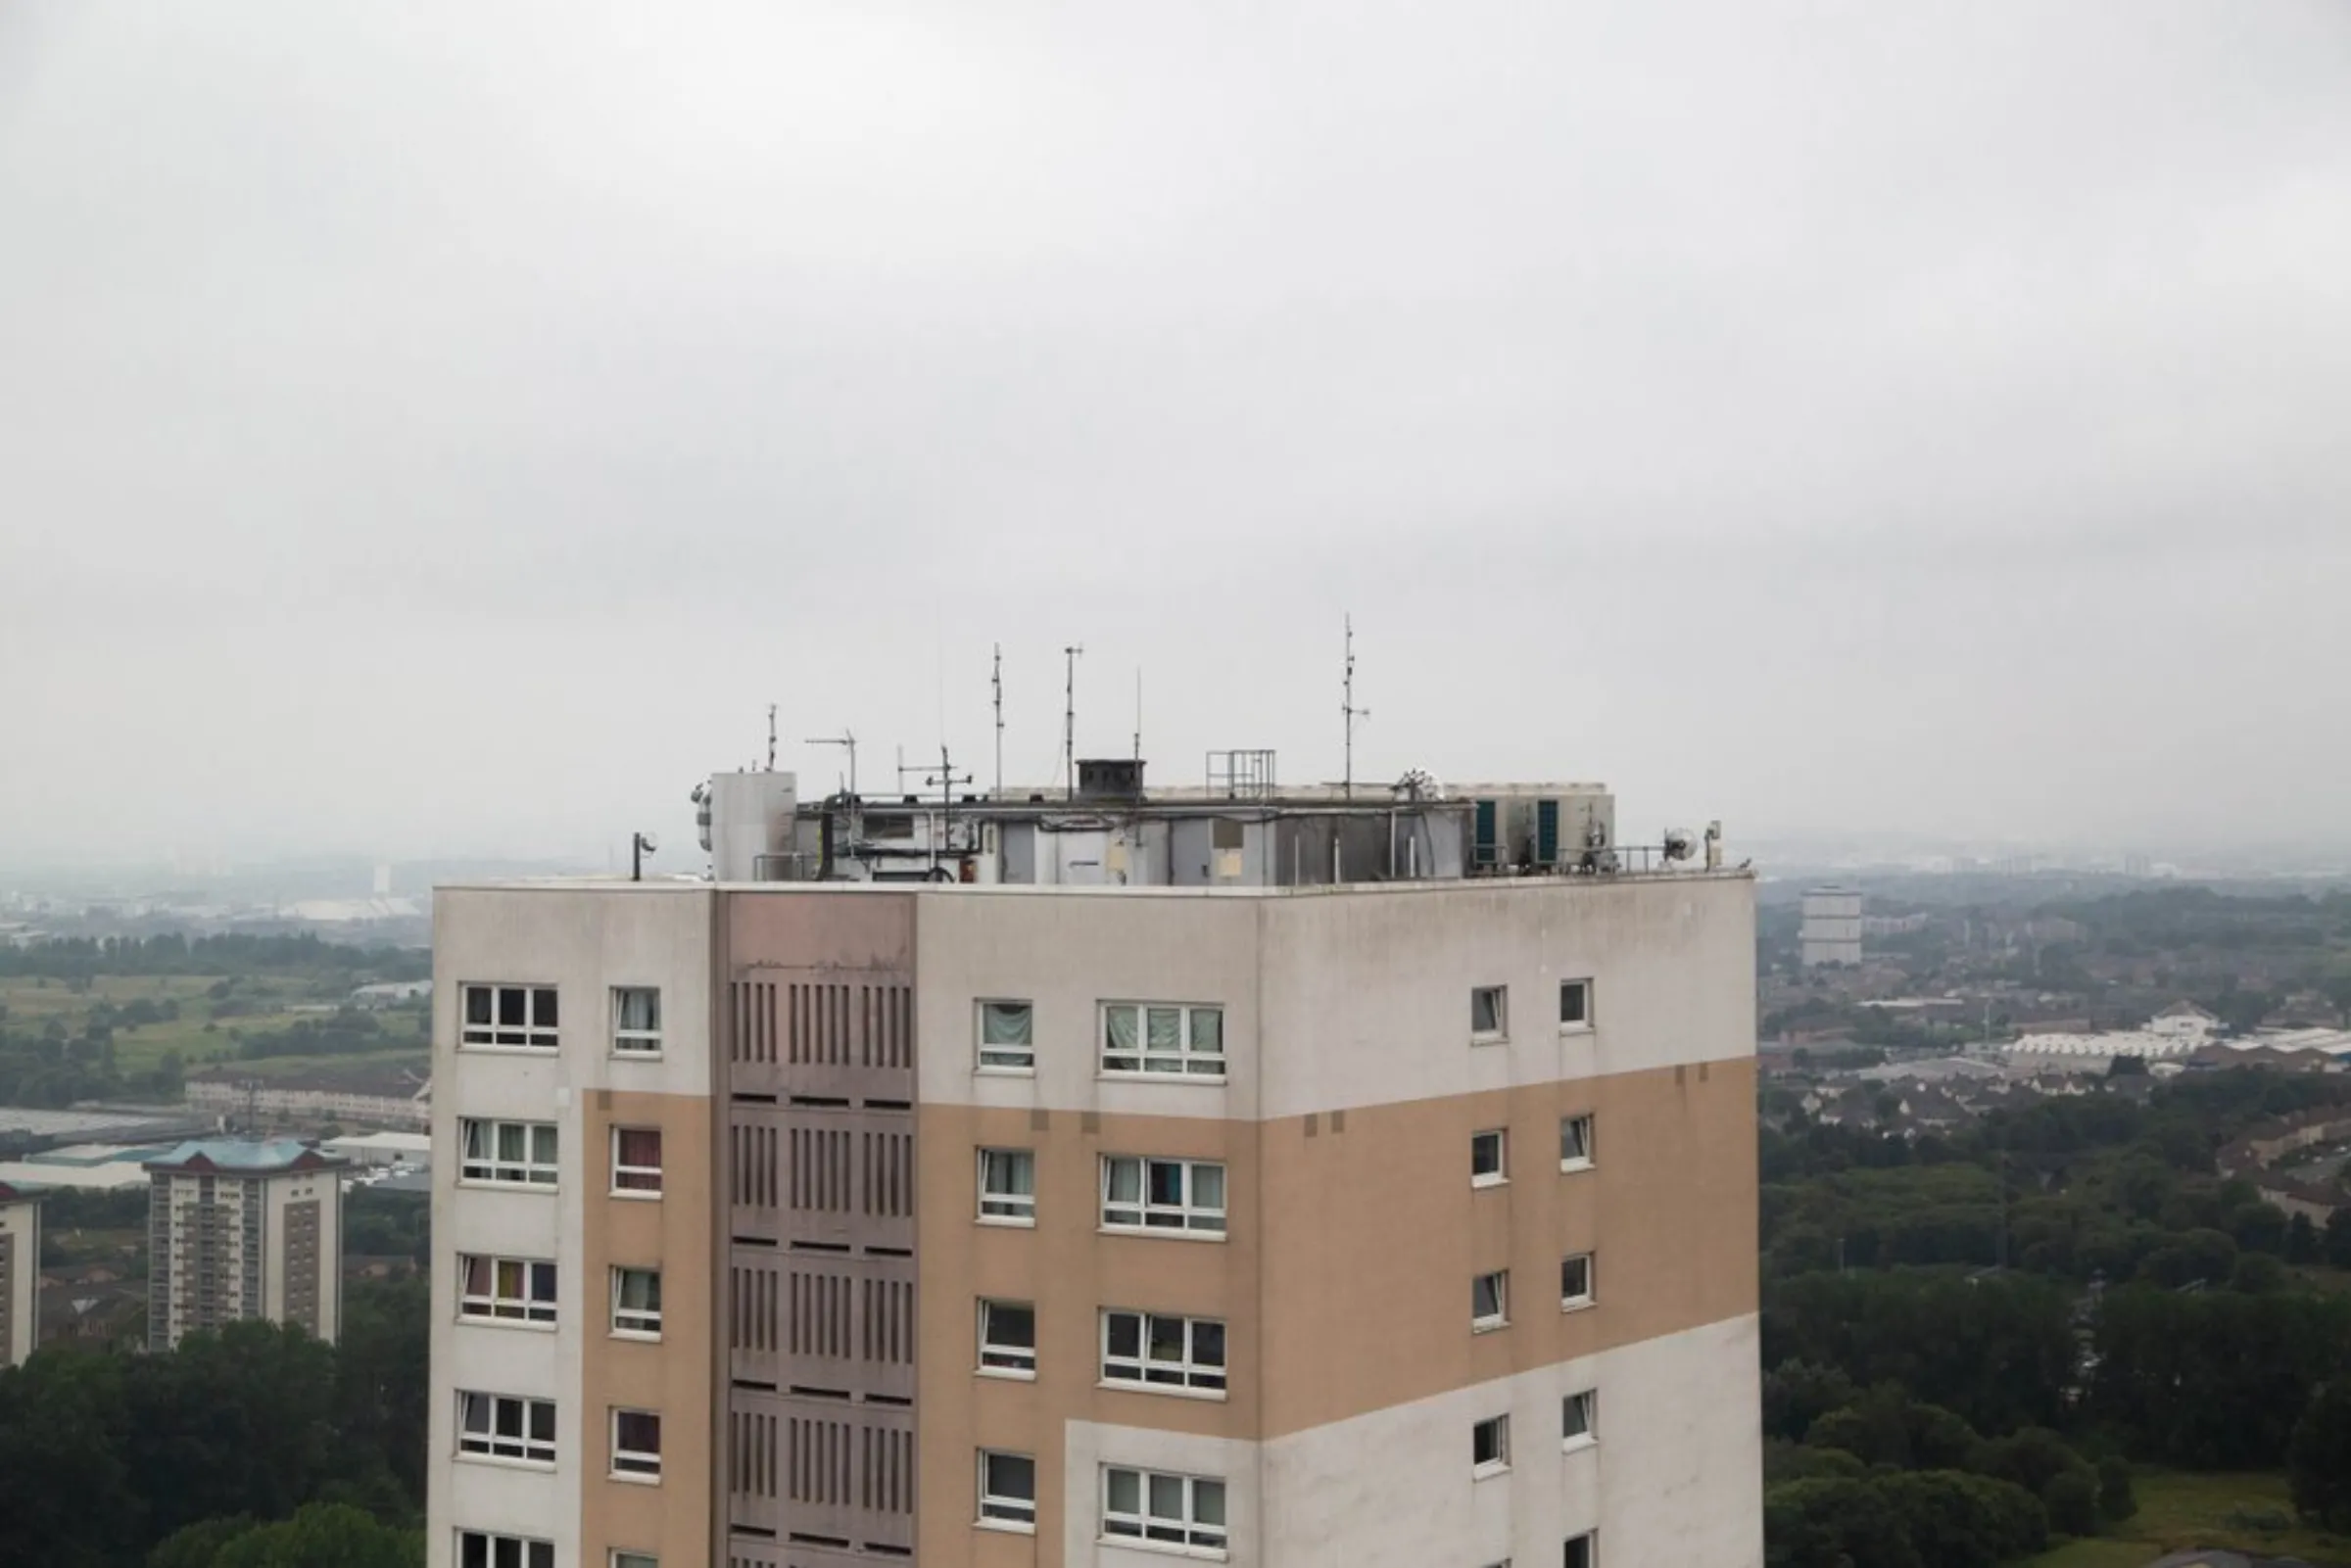 Air-source heat pumps sit on the roof of a high-rise block of flats in Glasgow, United Kingdom, July 22, 2021. The heat generated is shared among the flats in the block